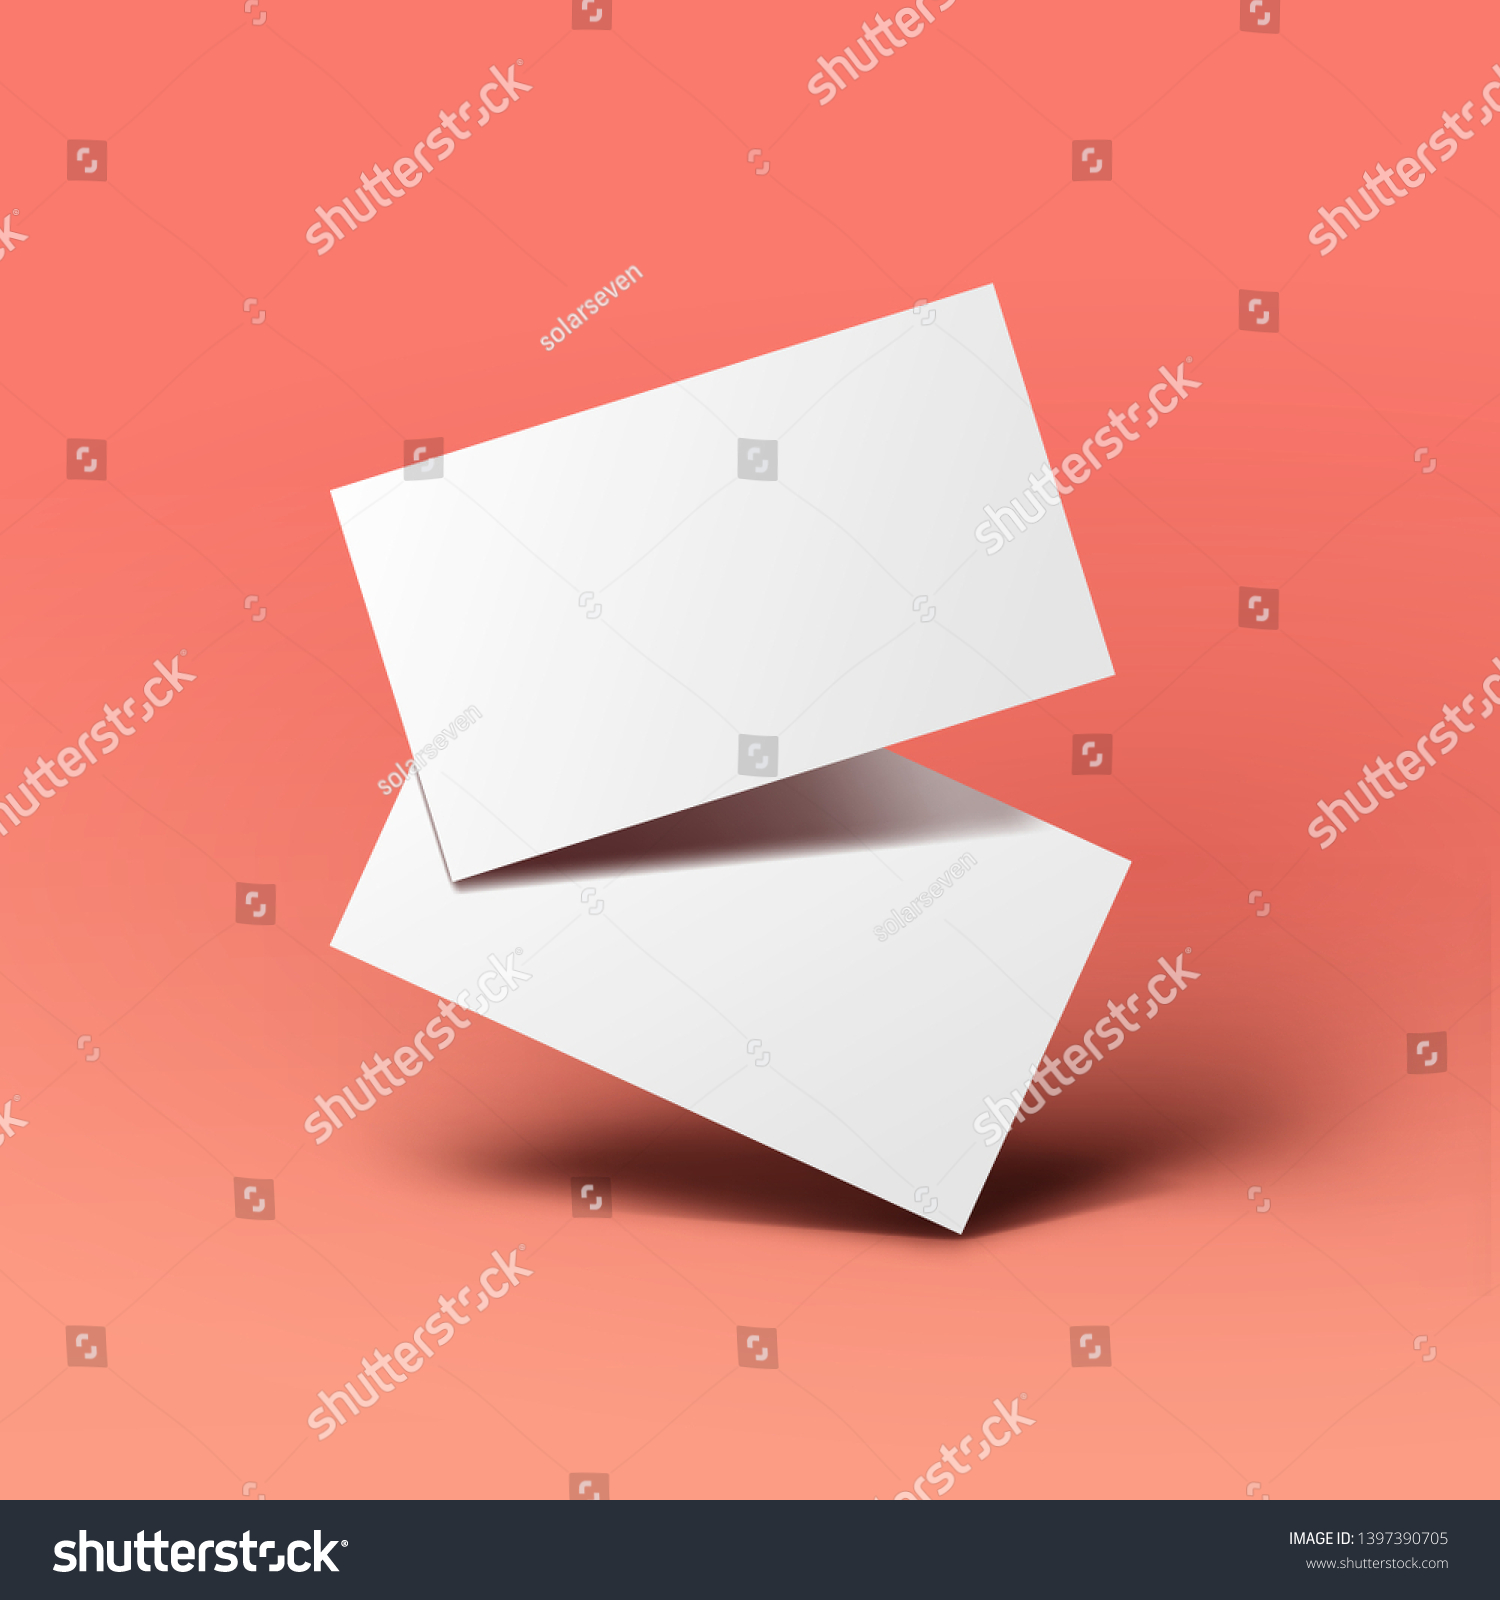 Realistic floating business branding cards template mockup with shadows. Vector illustration #1397390705